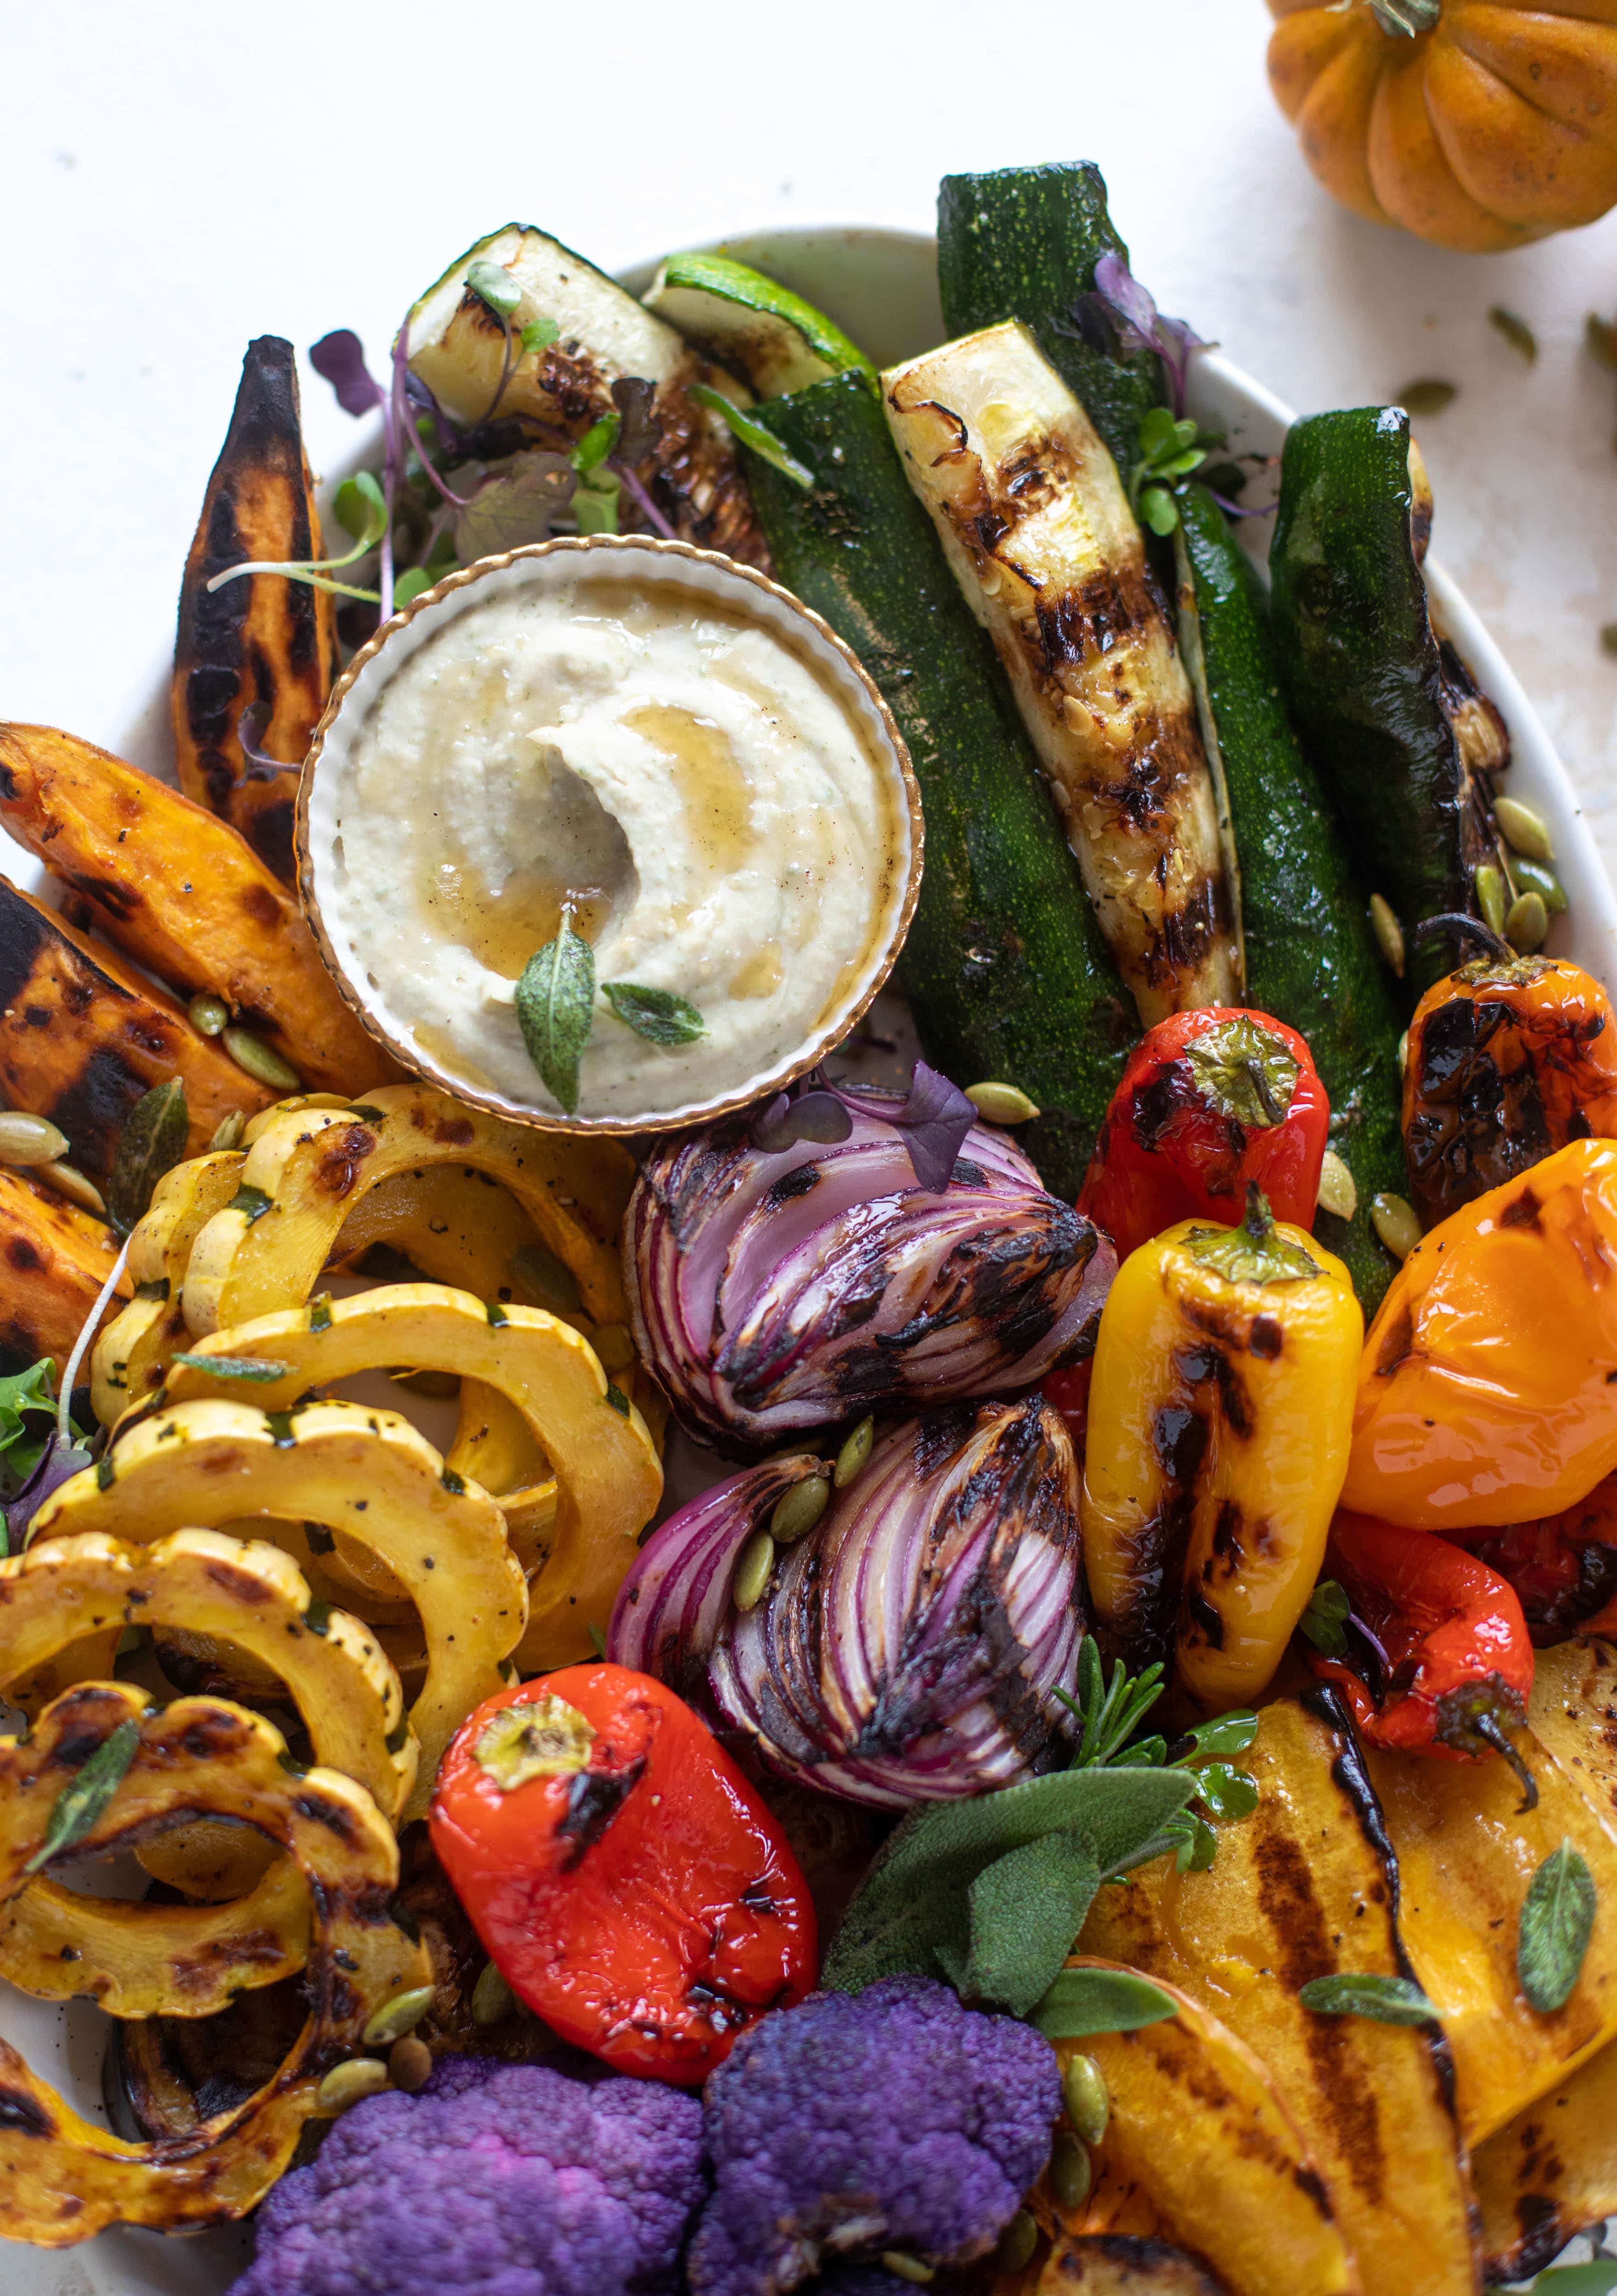 These grilled autumn vegetables make the best side dish or appetizer! Especially when served with the sage brown butter white bean dip. YUM.